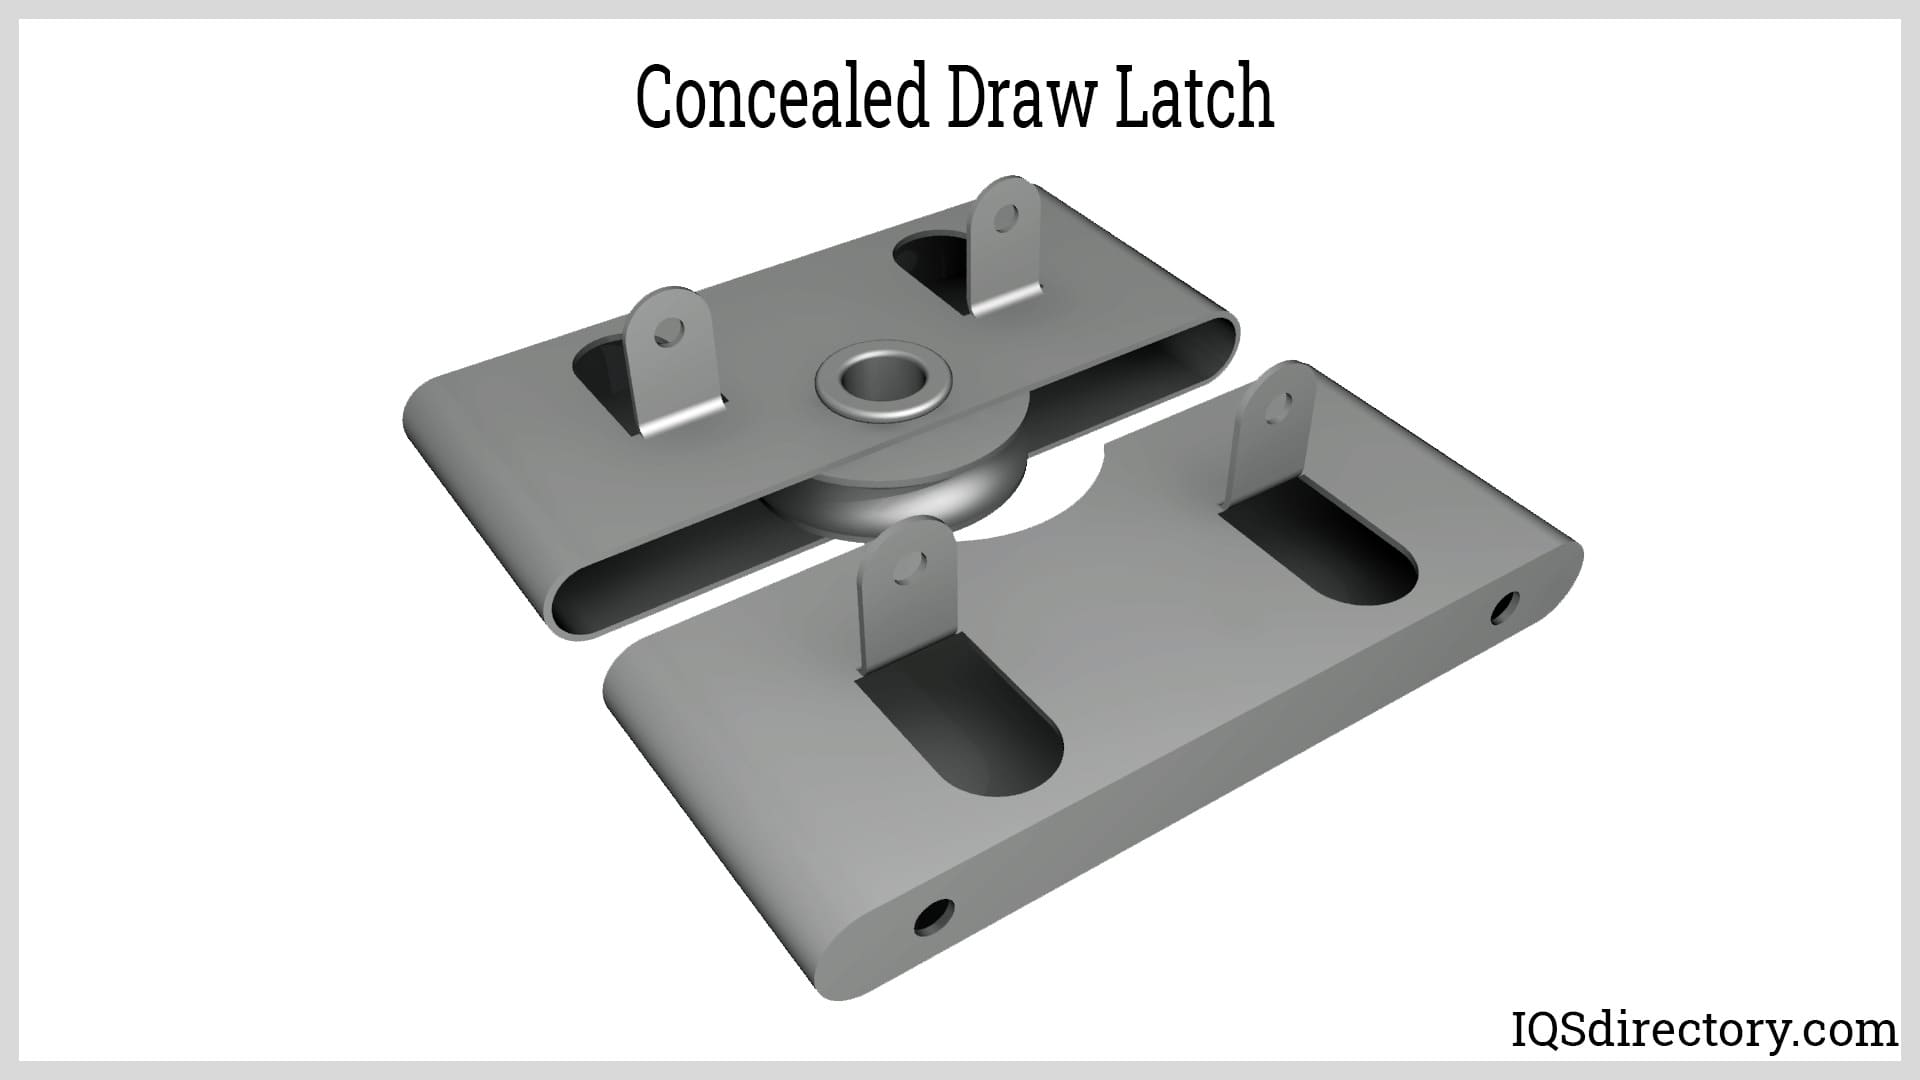 Concealed Draw Latch